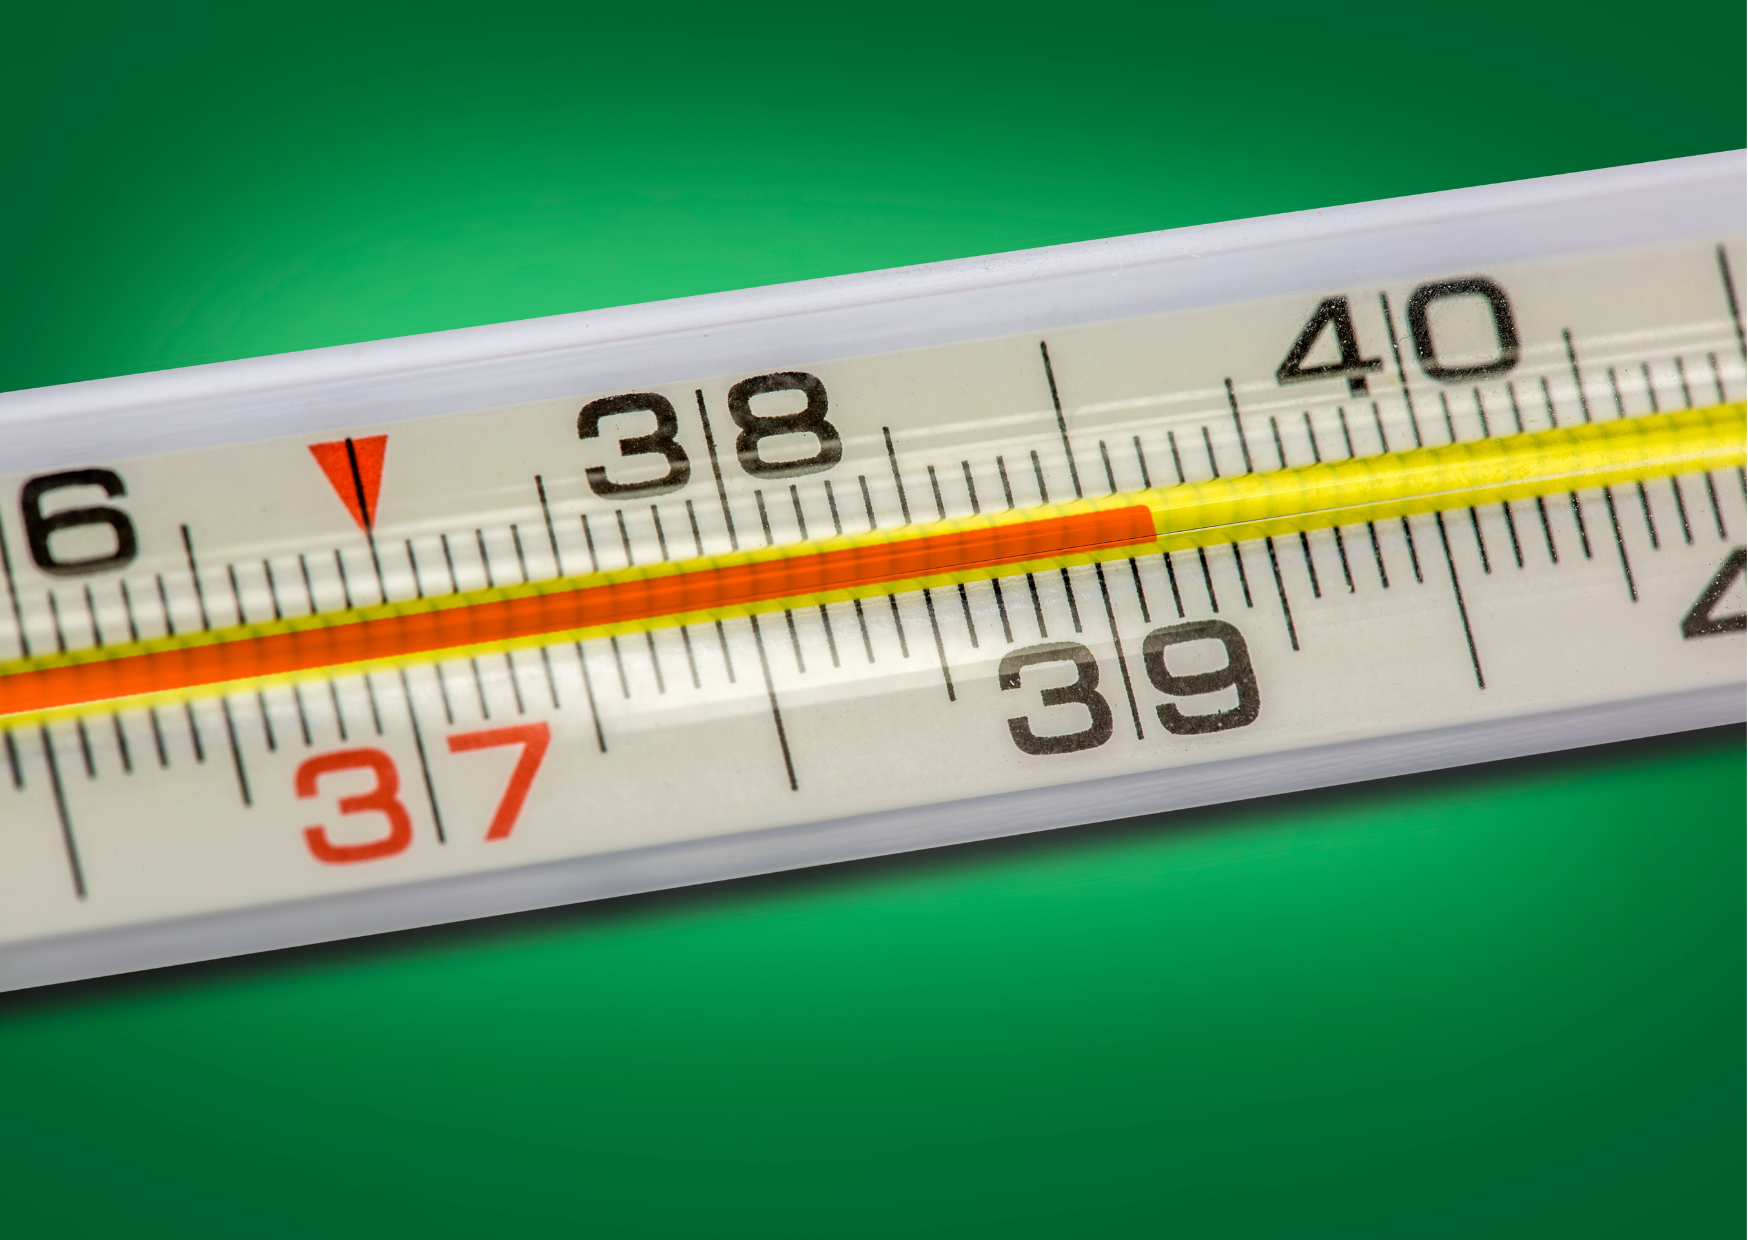 What ways can you measure temperature: Thermal Resources